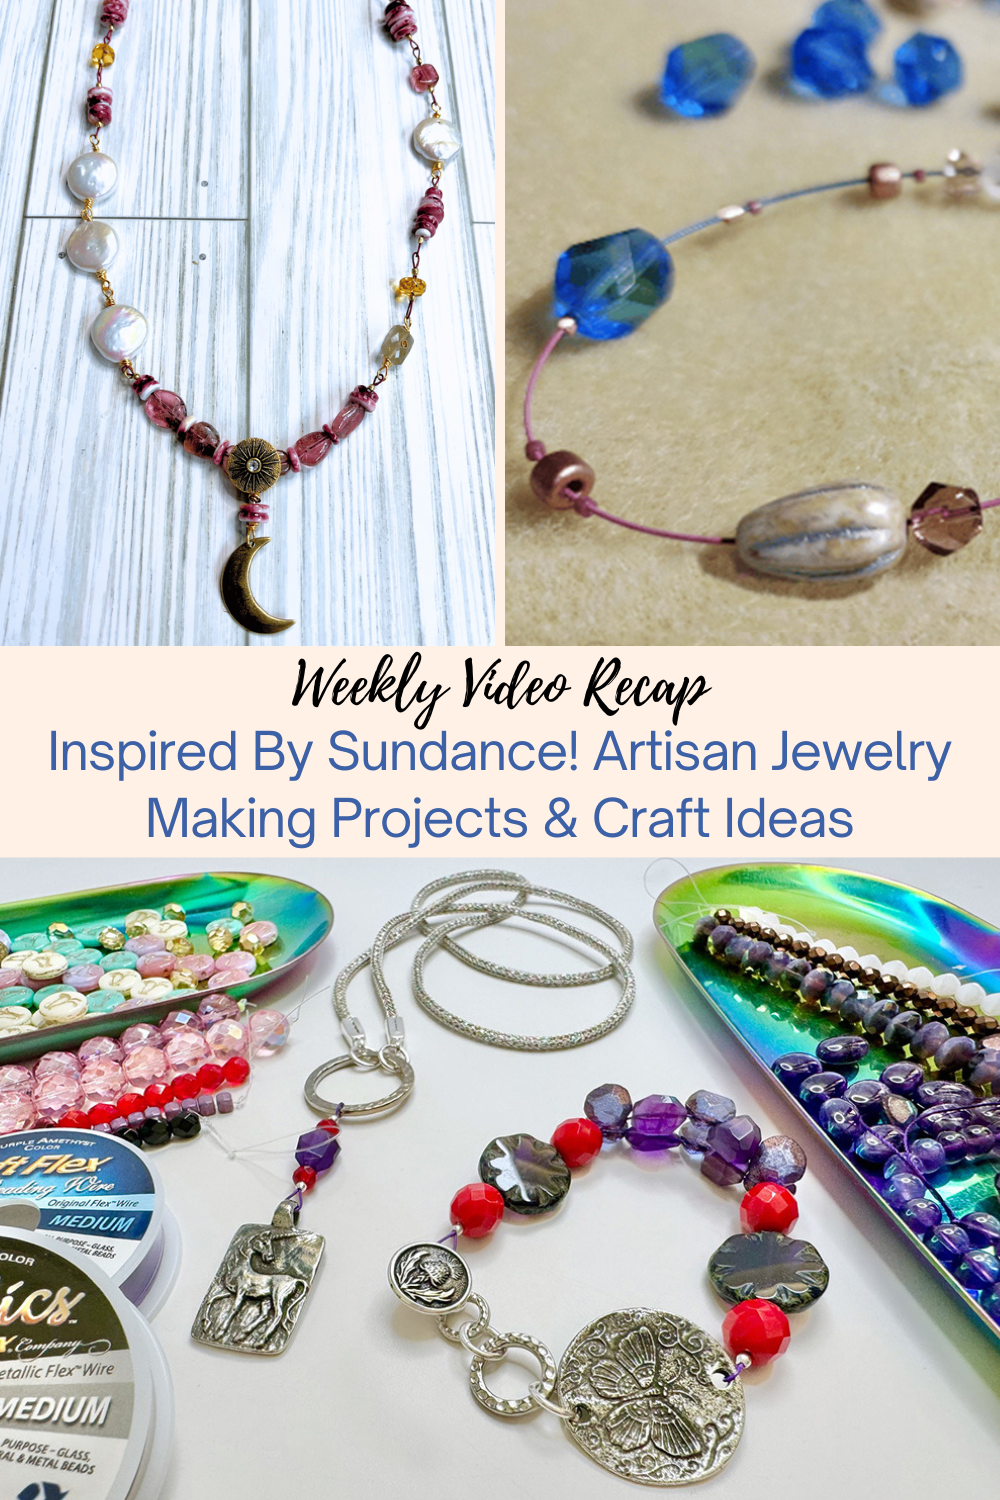 Inspired By Sundance! Artisan Jewelry Making Projects & Craft Ideas Collage